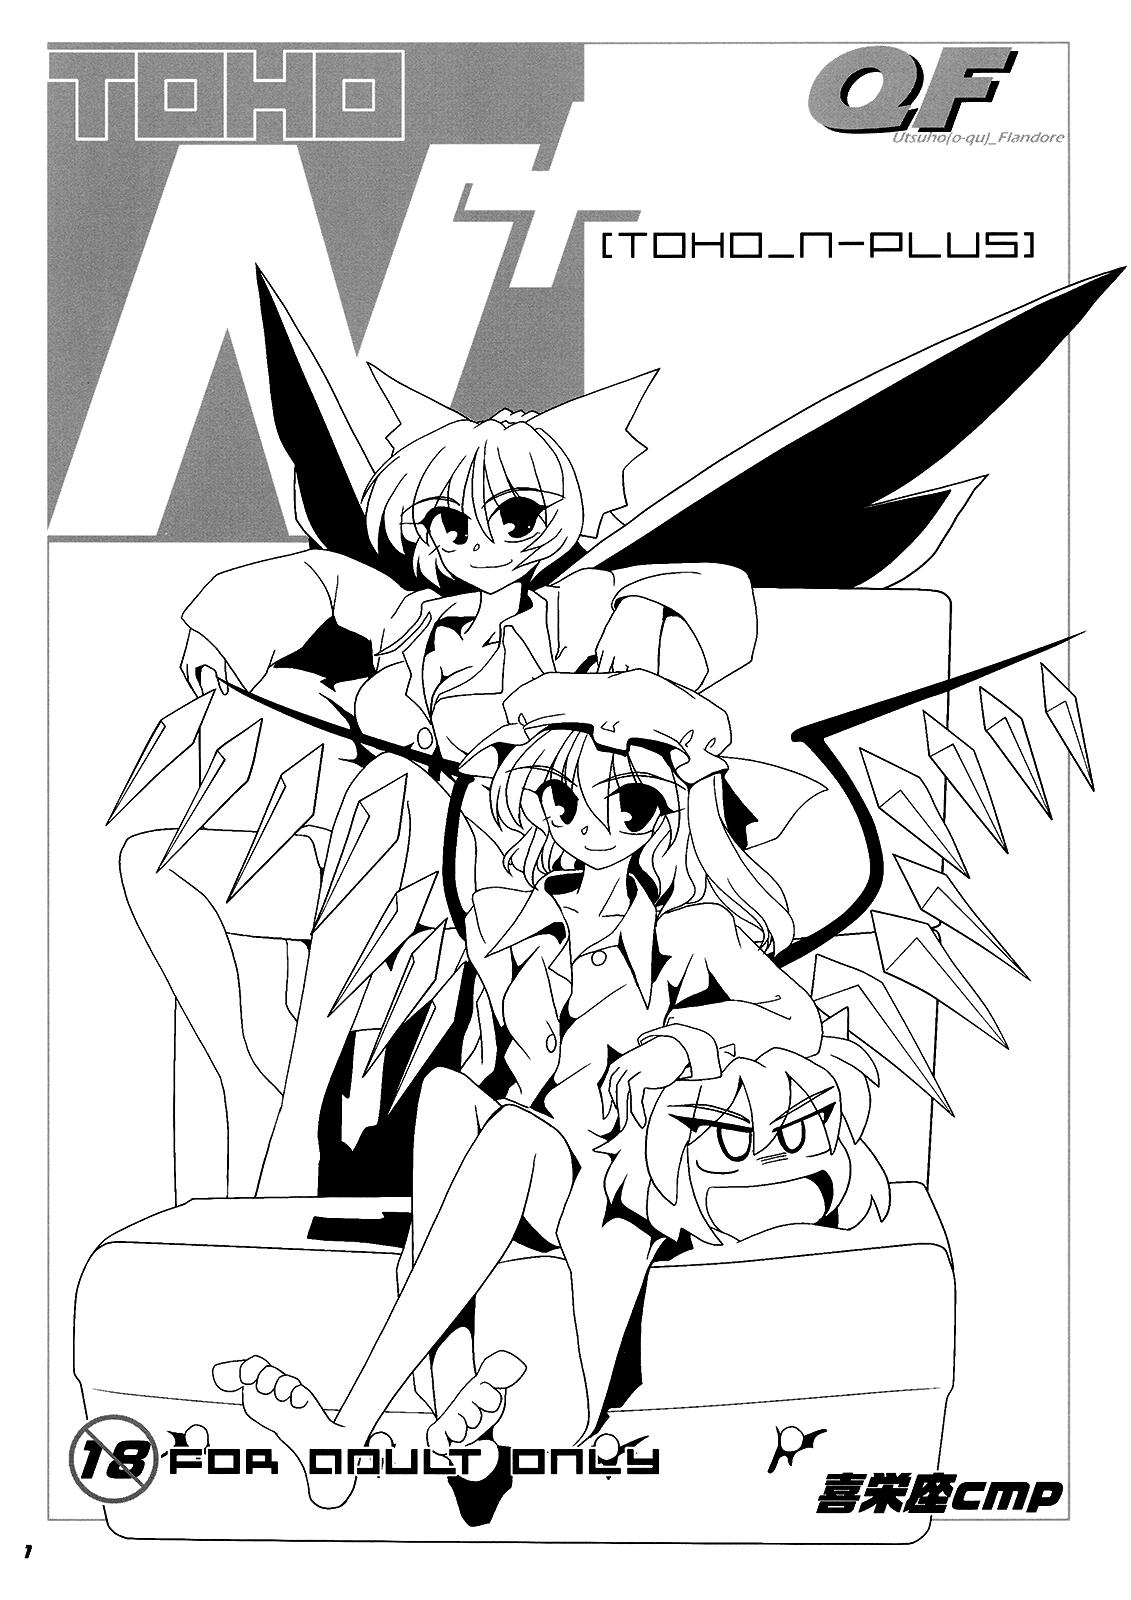 Porn TOHO N+ QF - Touhou project Missionary Position Porn - Page 2